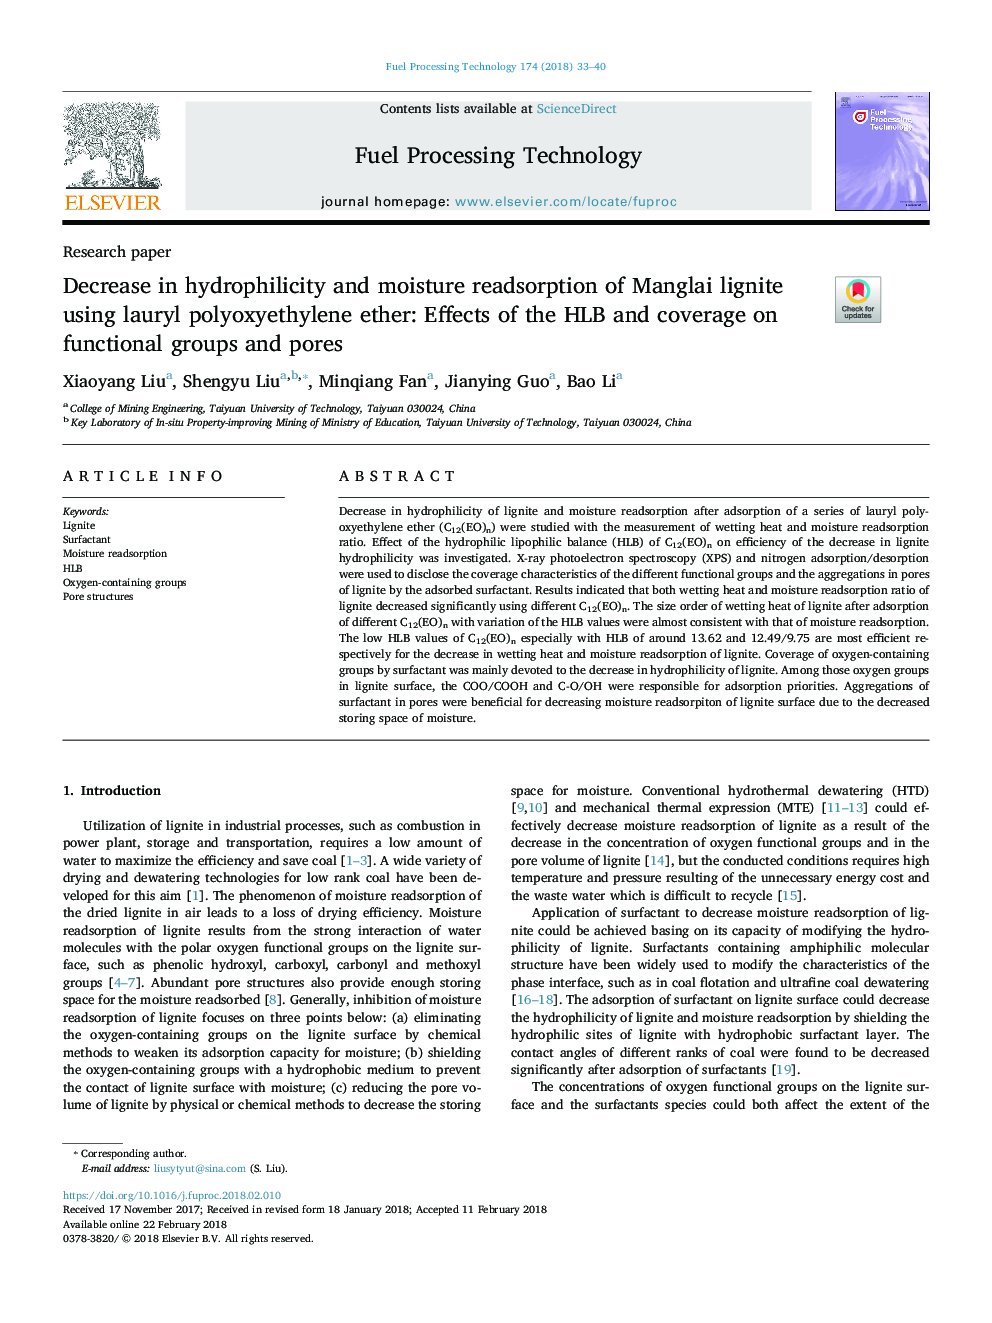 Decrease in hydrophilicity and moisture readsorption of Manglai lignite using lauryl polyoxyethylene ether: Effects of the HLB and coverage on functional groups and pores